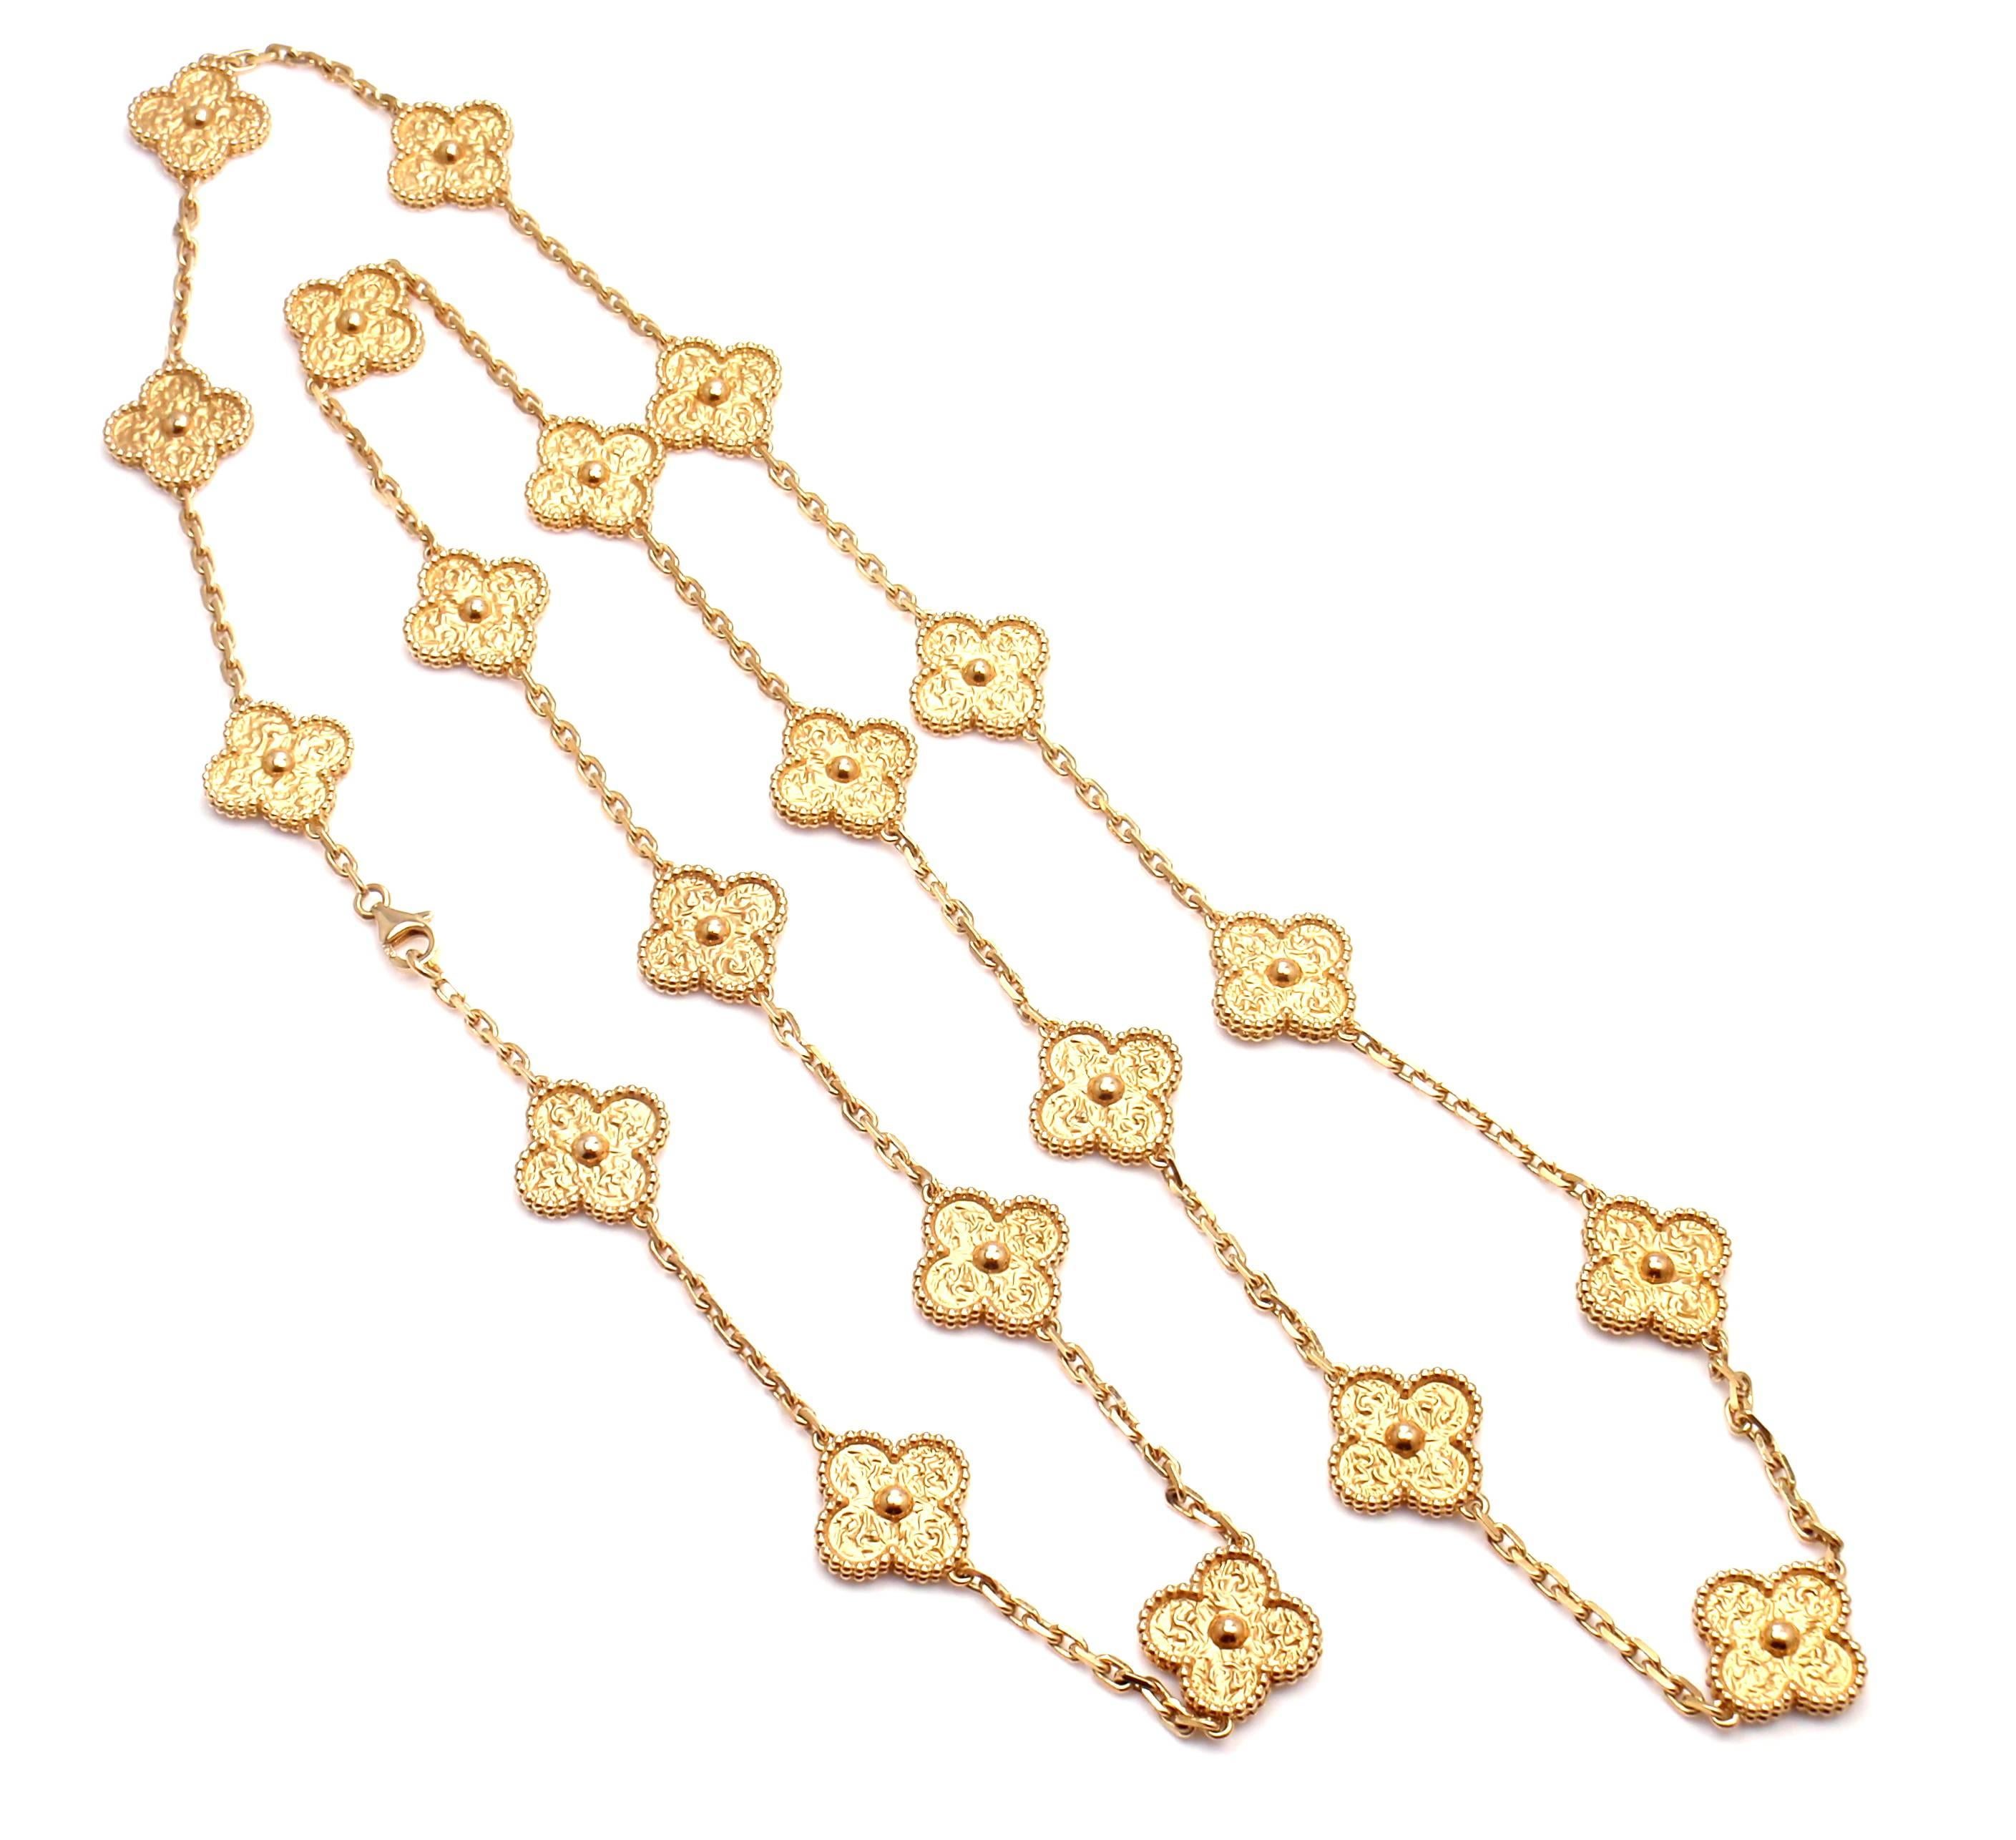 18k Yellow Gold Alhambra 20 Motif Necklace by Van Cleef & Arpels. 
With 20 motifs of 18k yellow gold alhambras 15mm each.
This necklace comes with VCA box and certificate.
Details: 
Length: 33